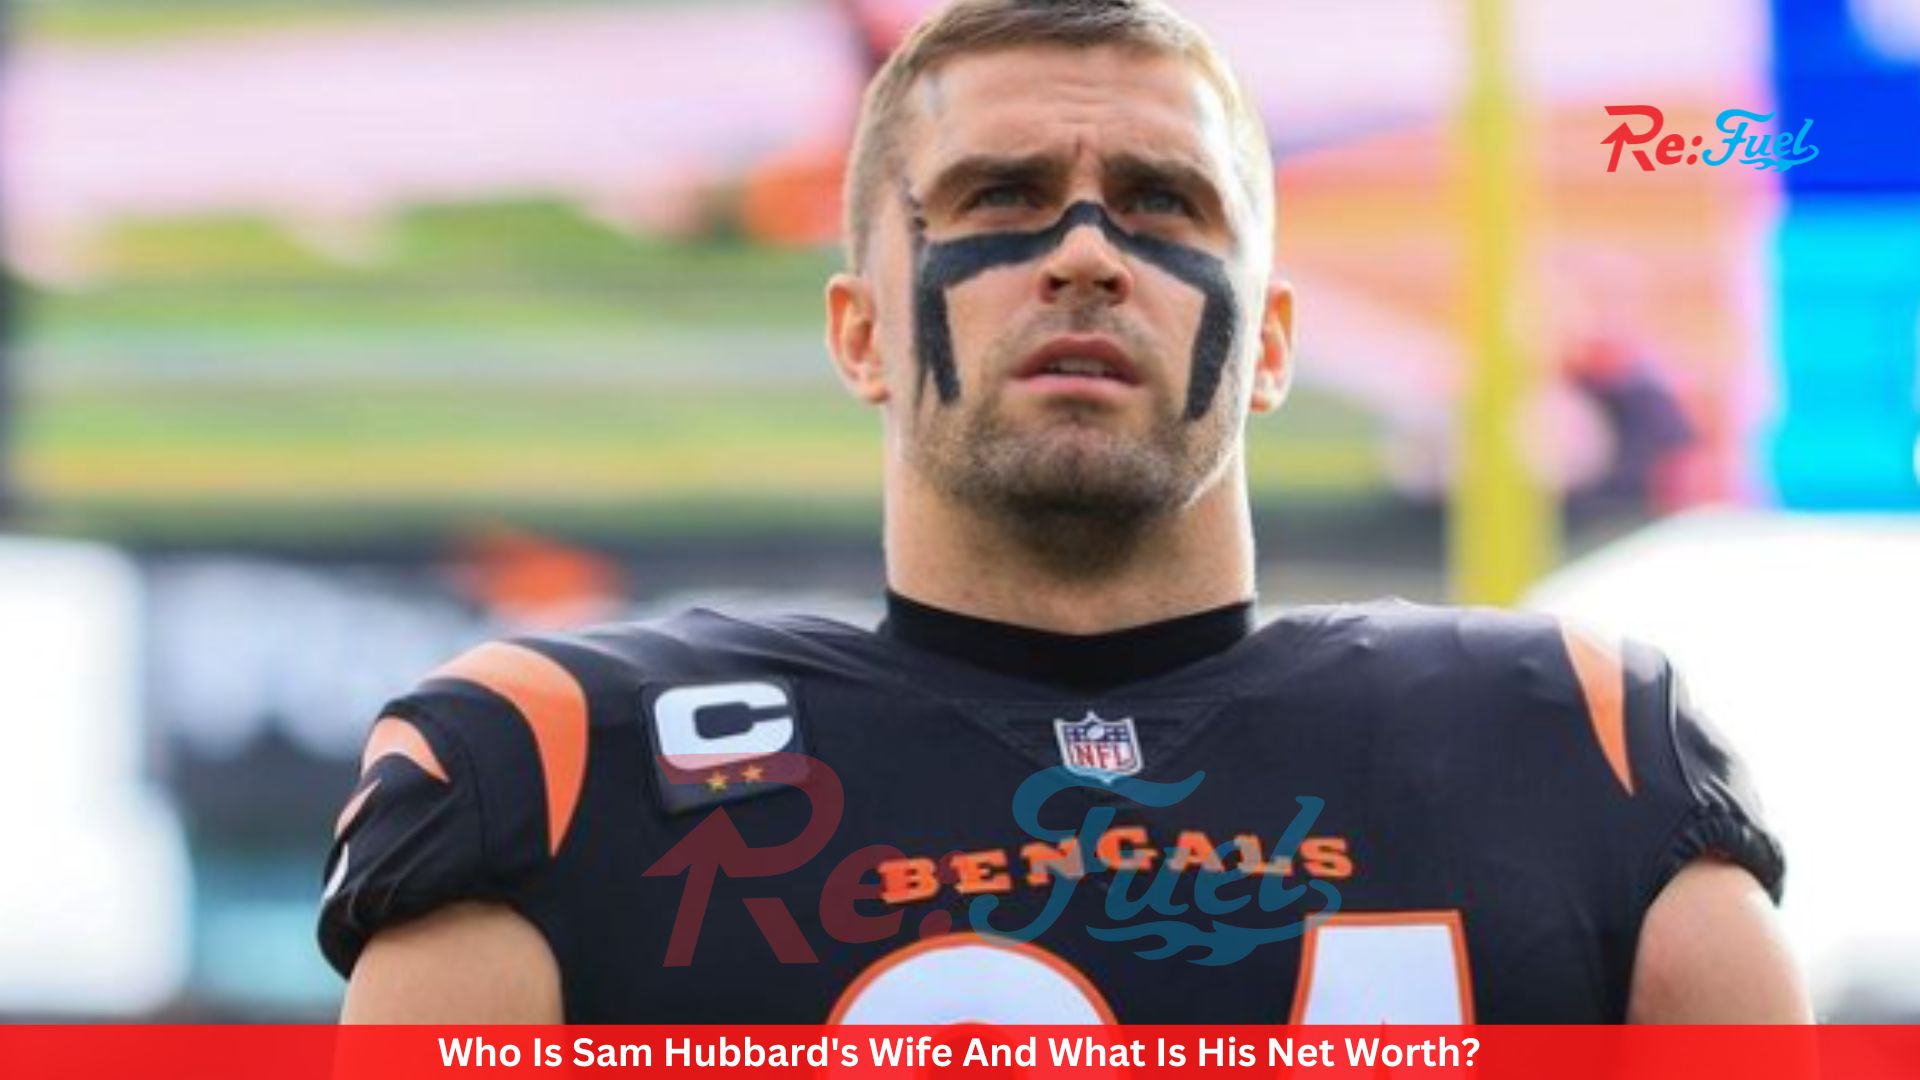 Who Is Sam Hubbard's Wife And What Is His Net Worth?